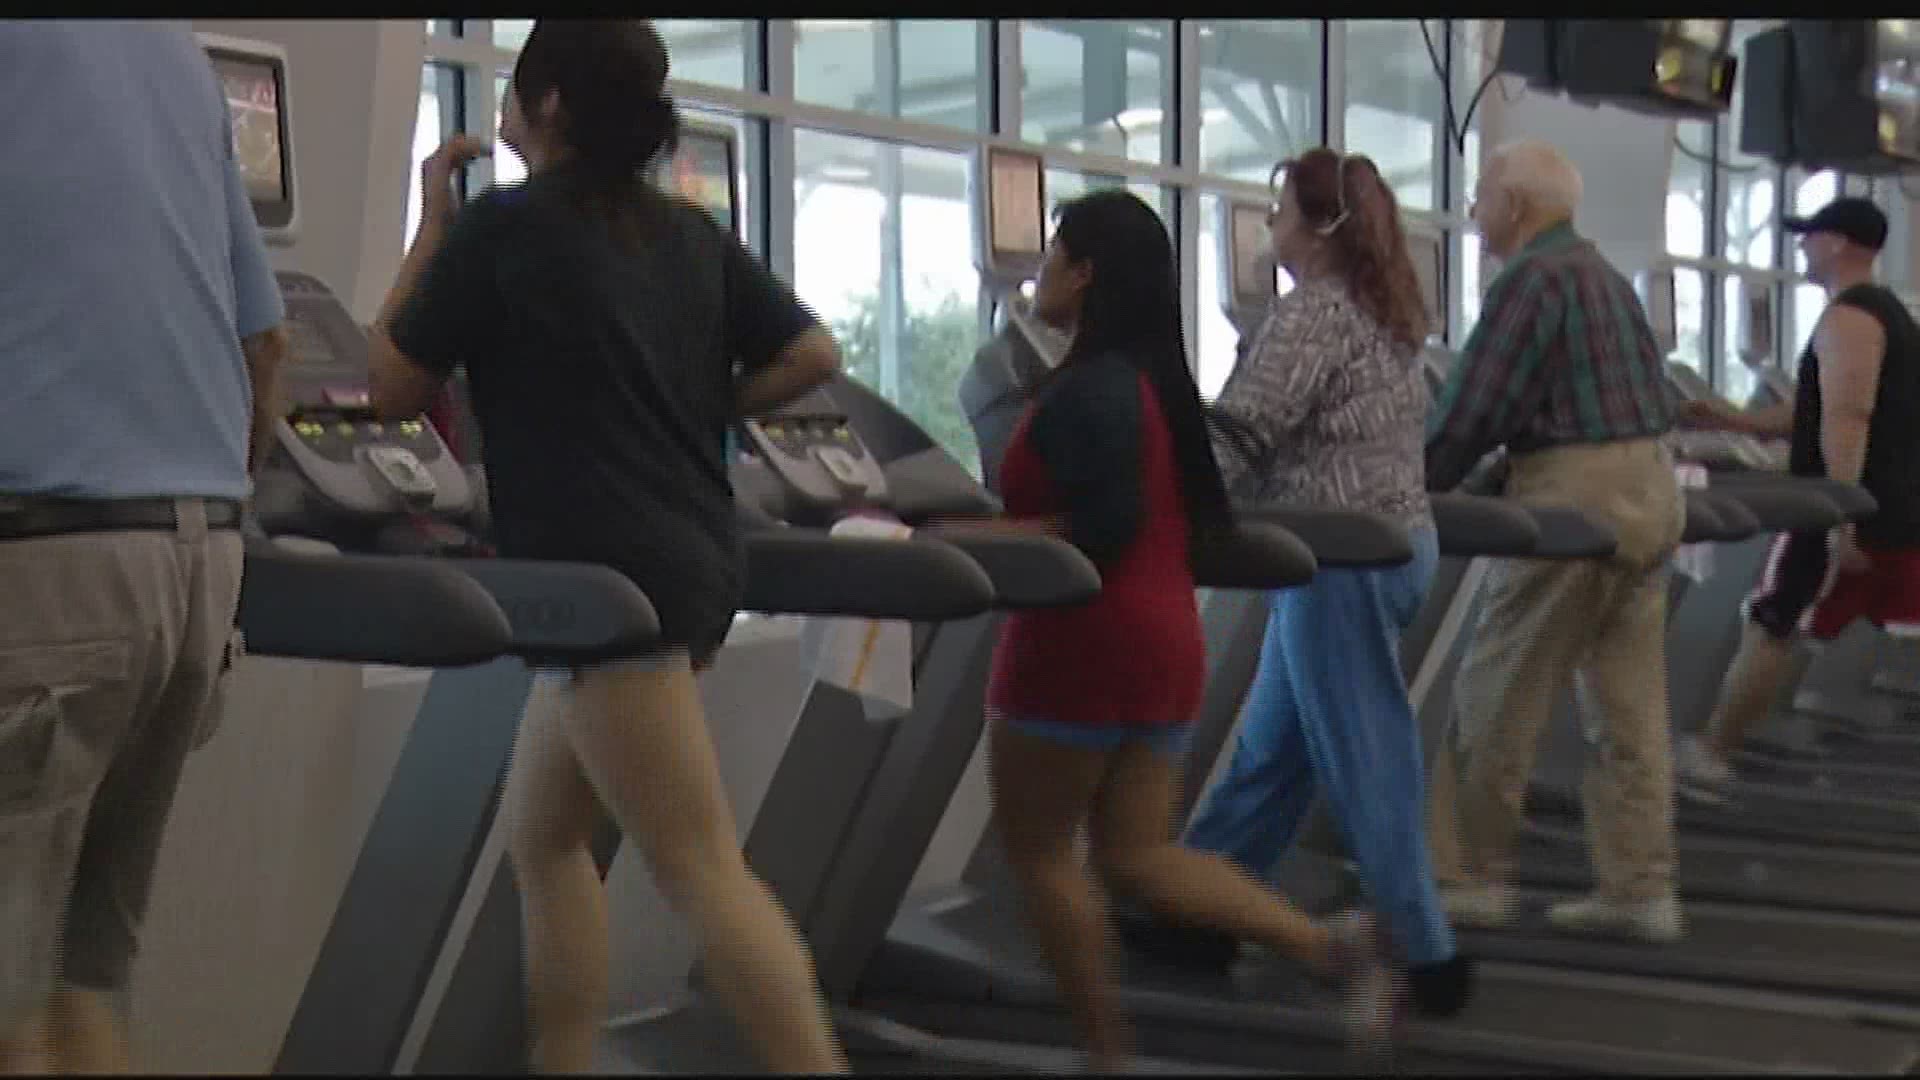 As fitness centers across Pennsylvania reopen, what are you doing to keep the virus away as you go to workout?